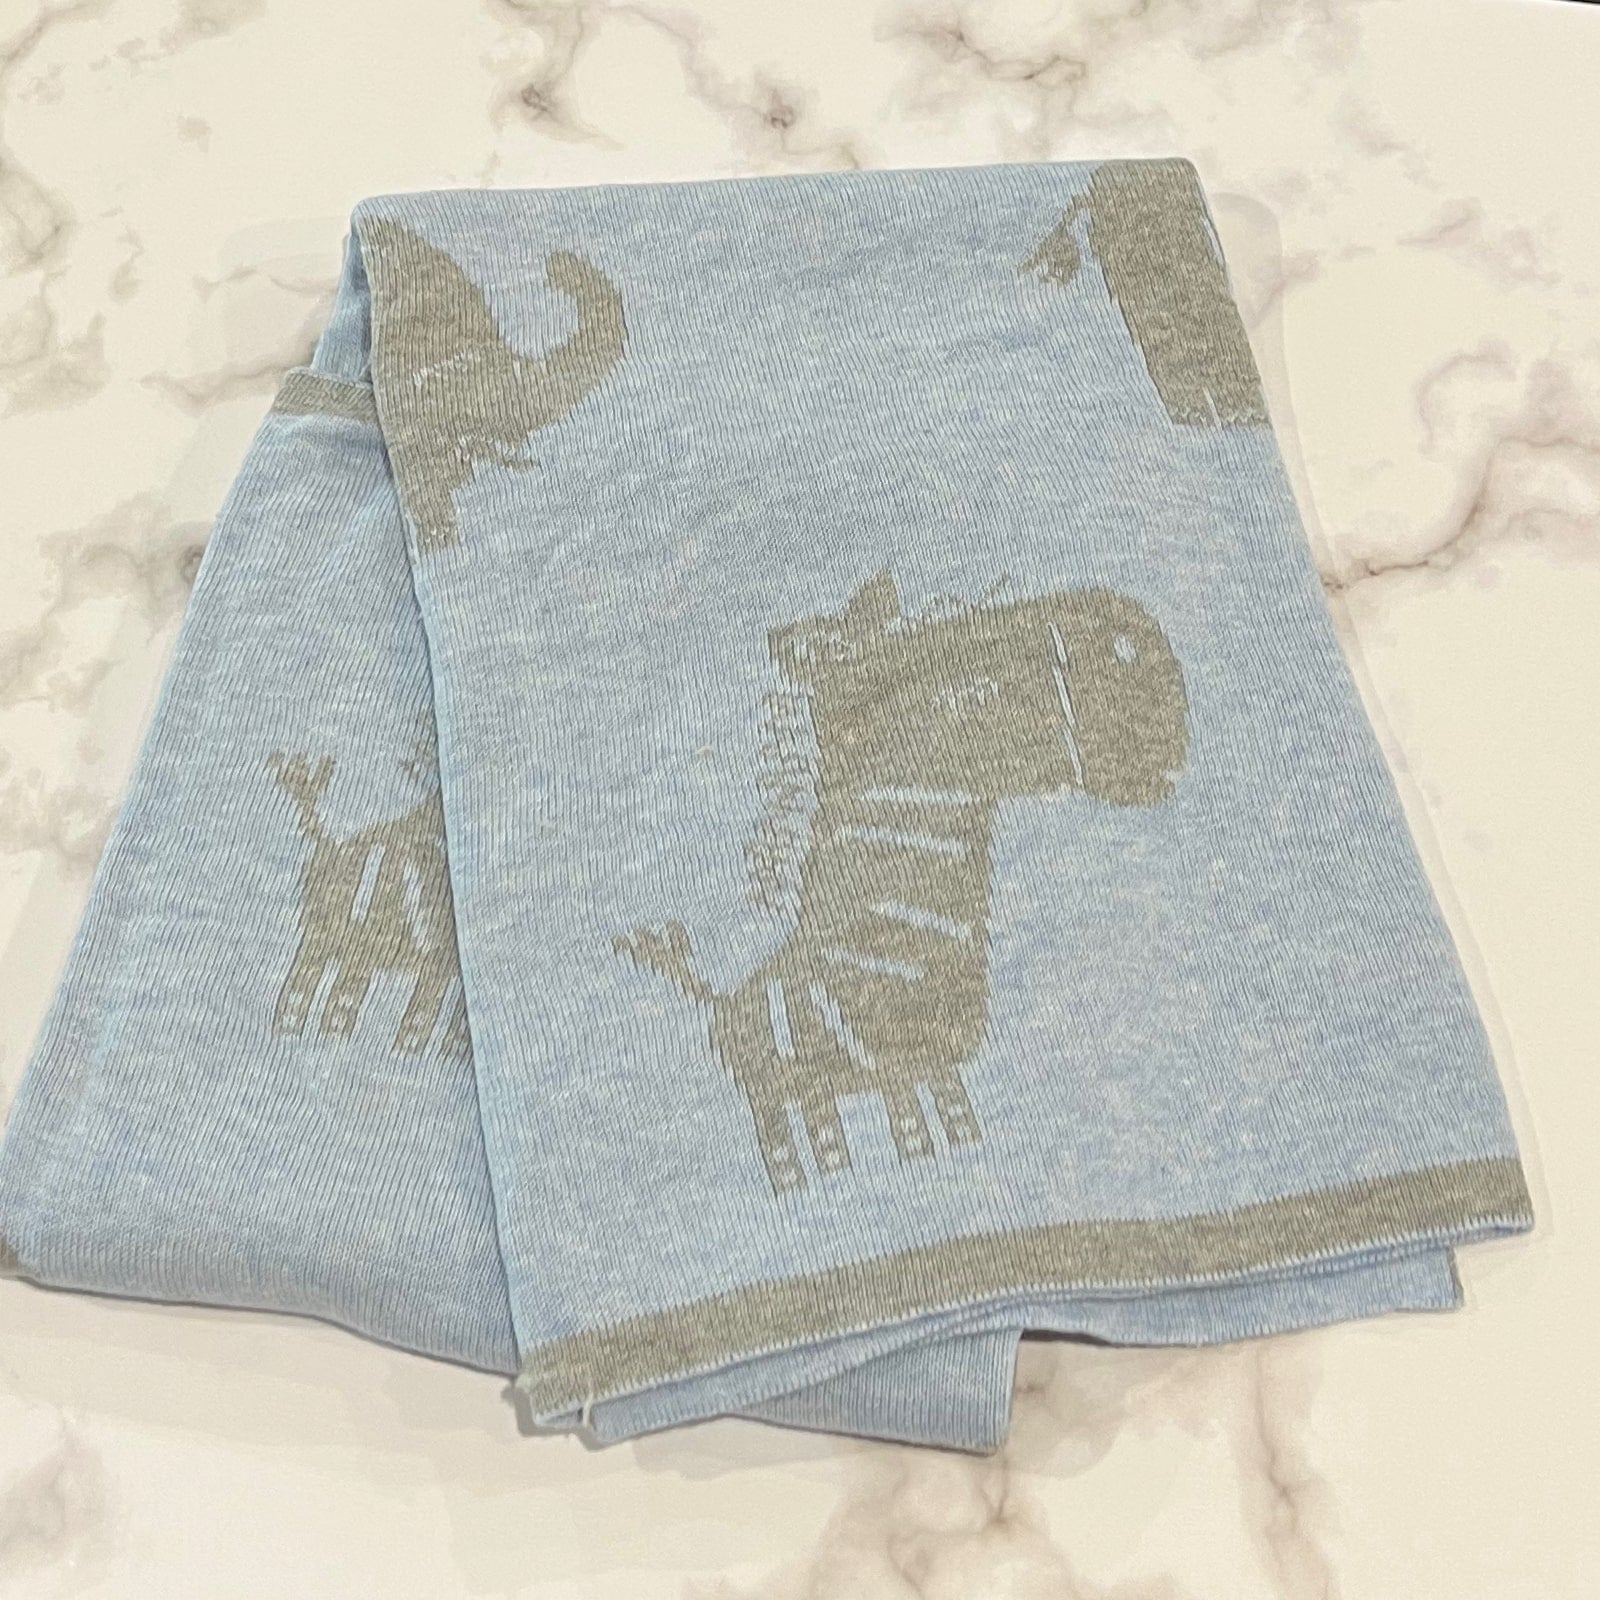 Clumsy Zoo Blanket - Baby Blankets at Louie Meets Lola